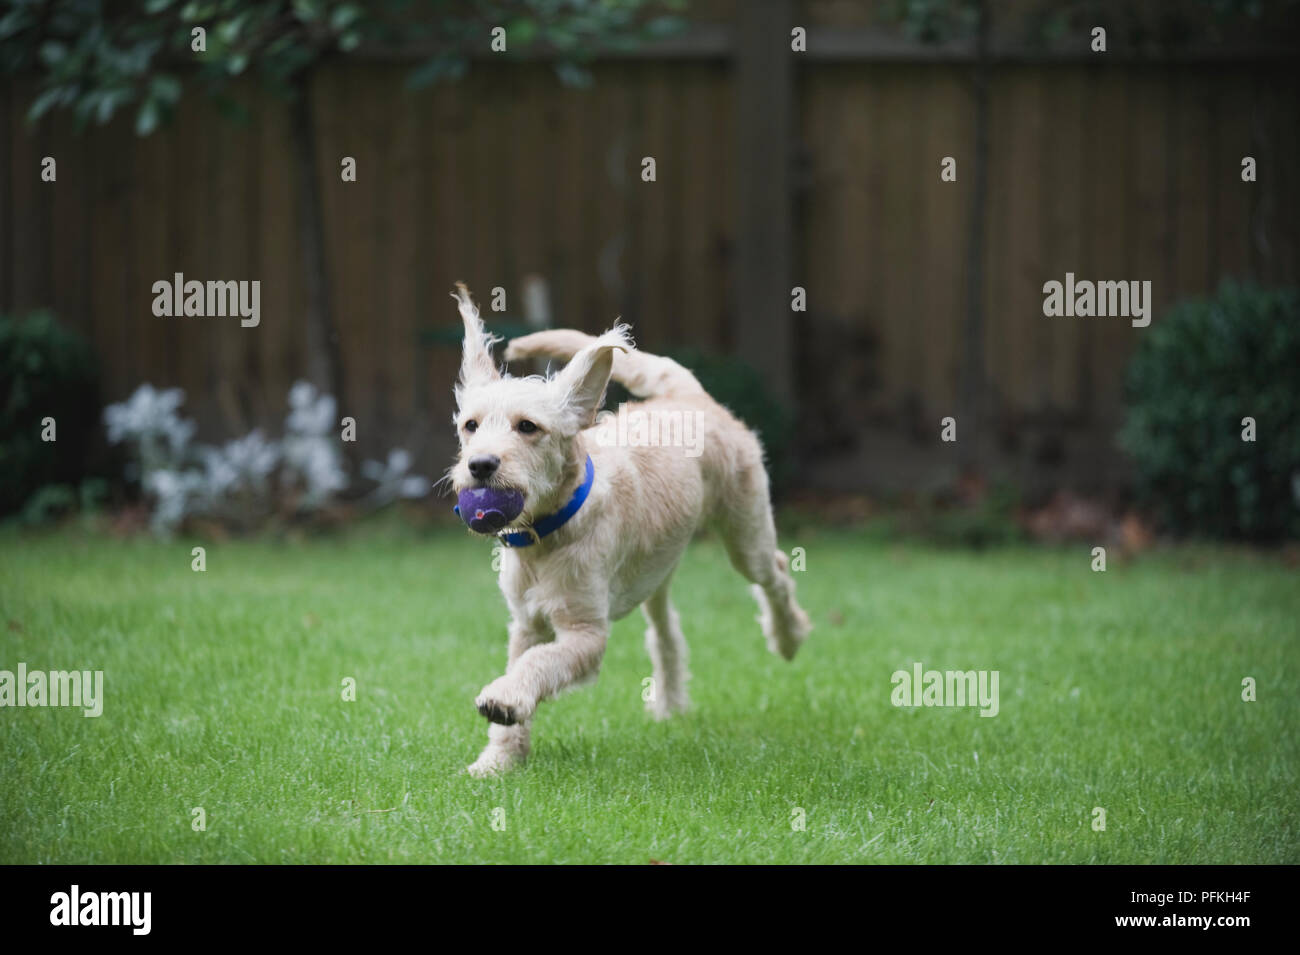 Labradoodle running across garden lawn holding a ball in its mouth, close-up Stock Photo